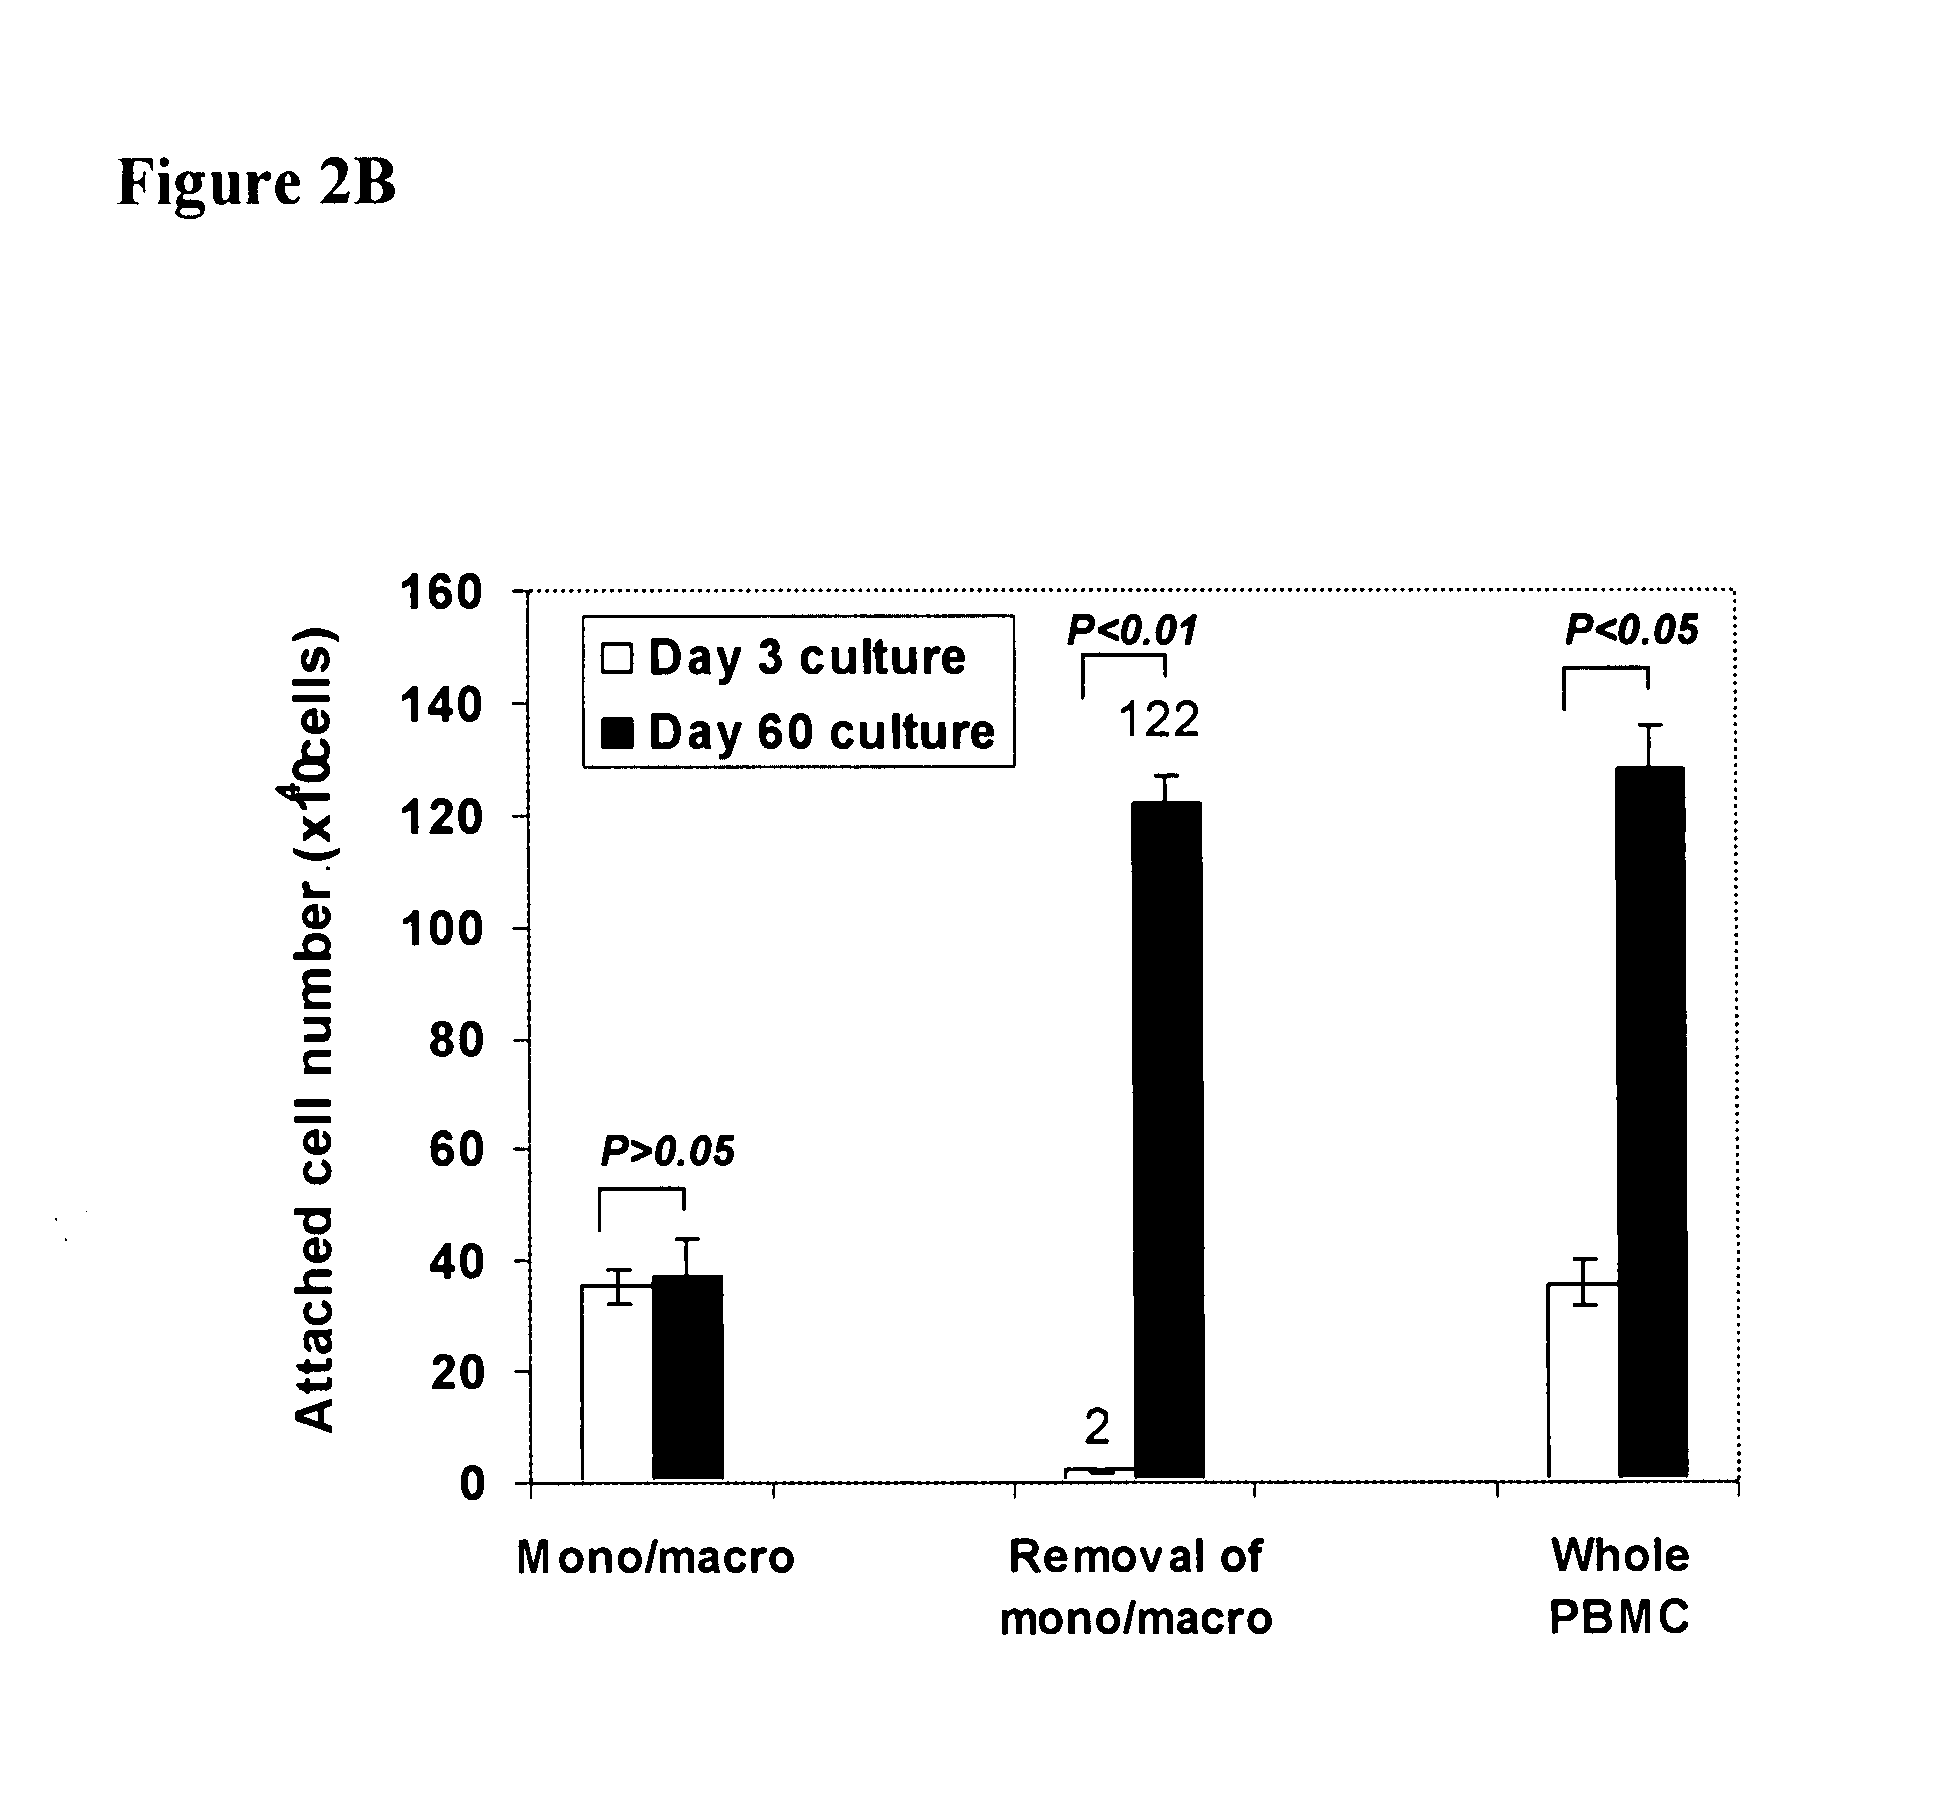 Embryonic-like stem cells derived from adult human peripheral blood and methods of use